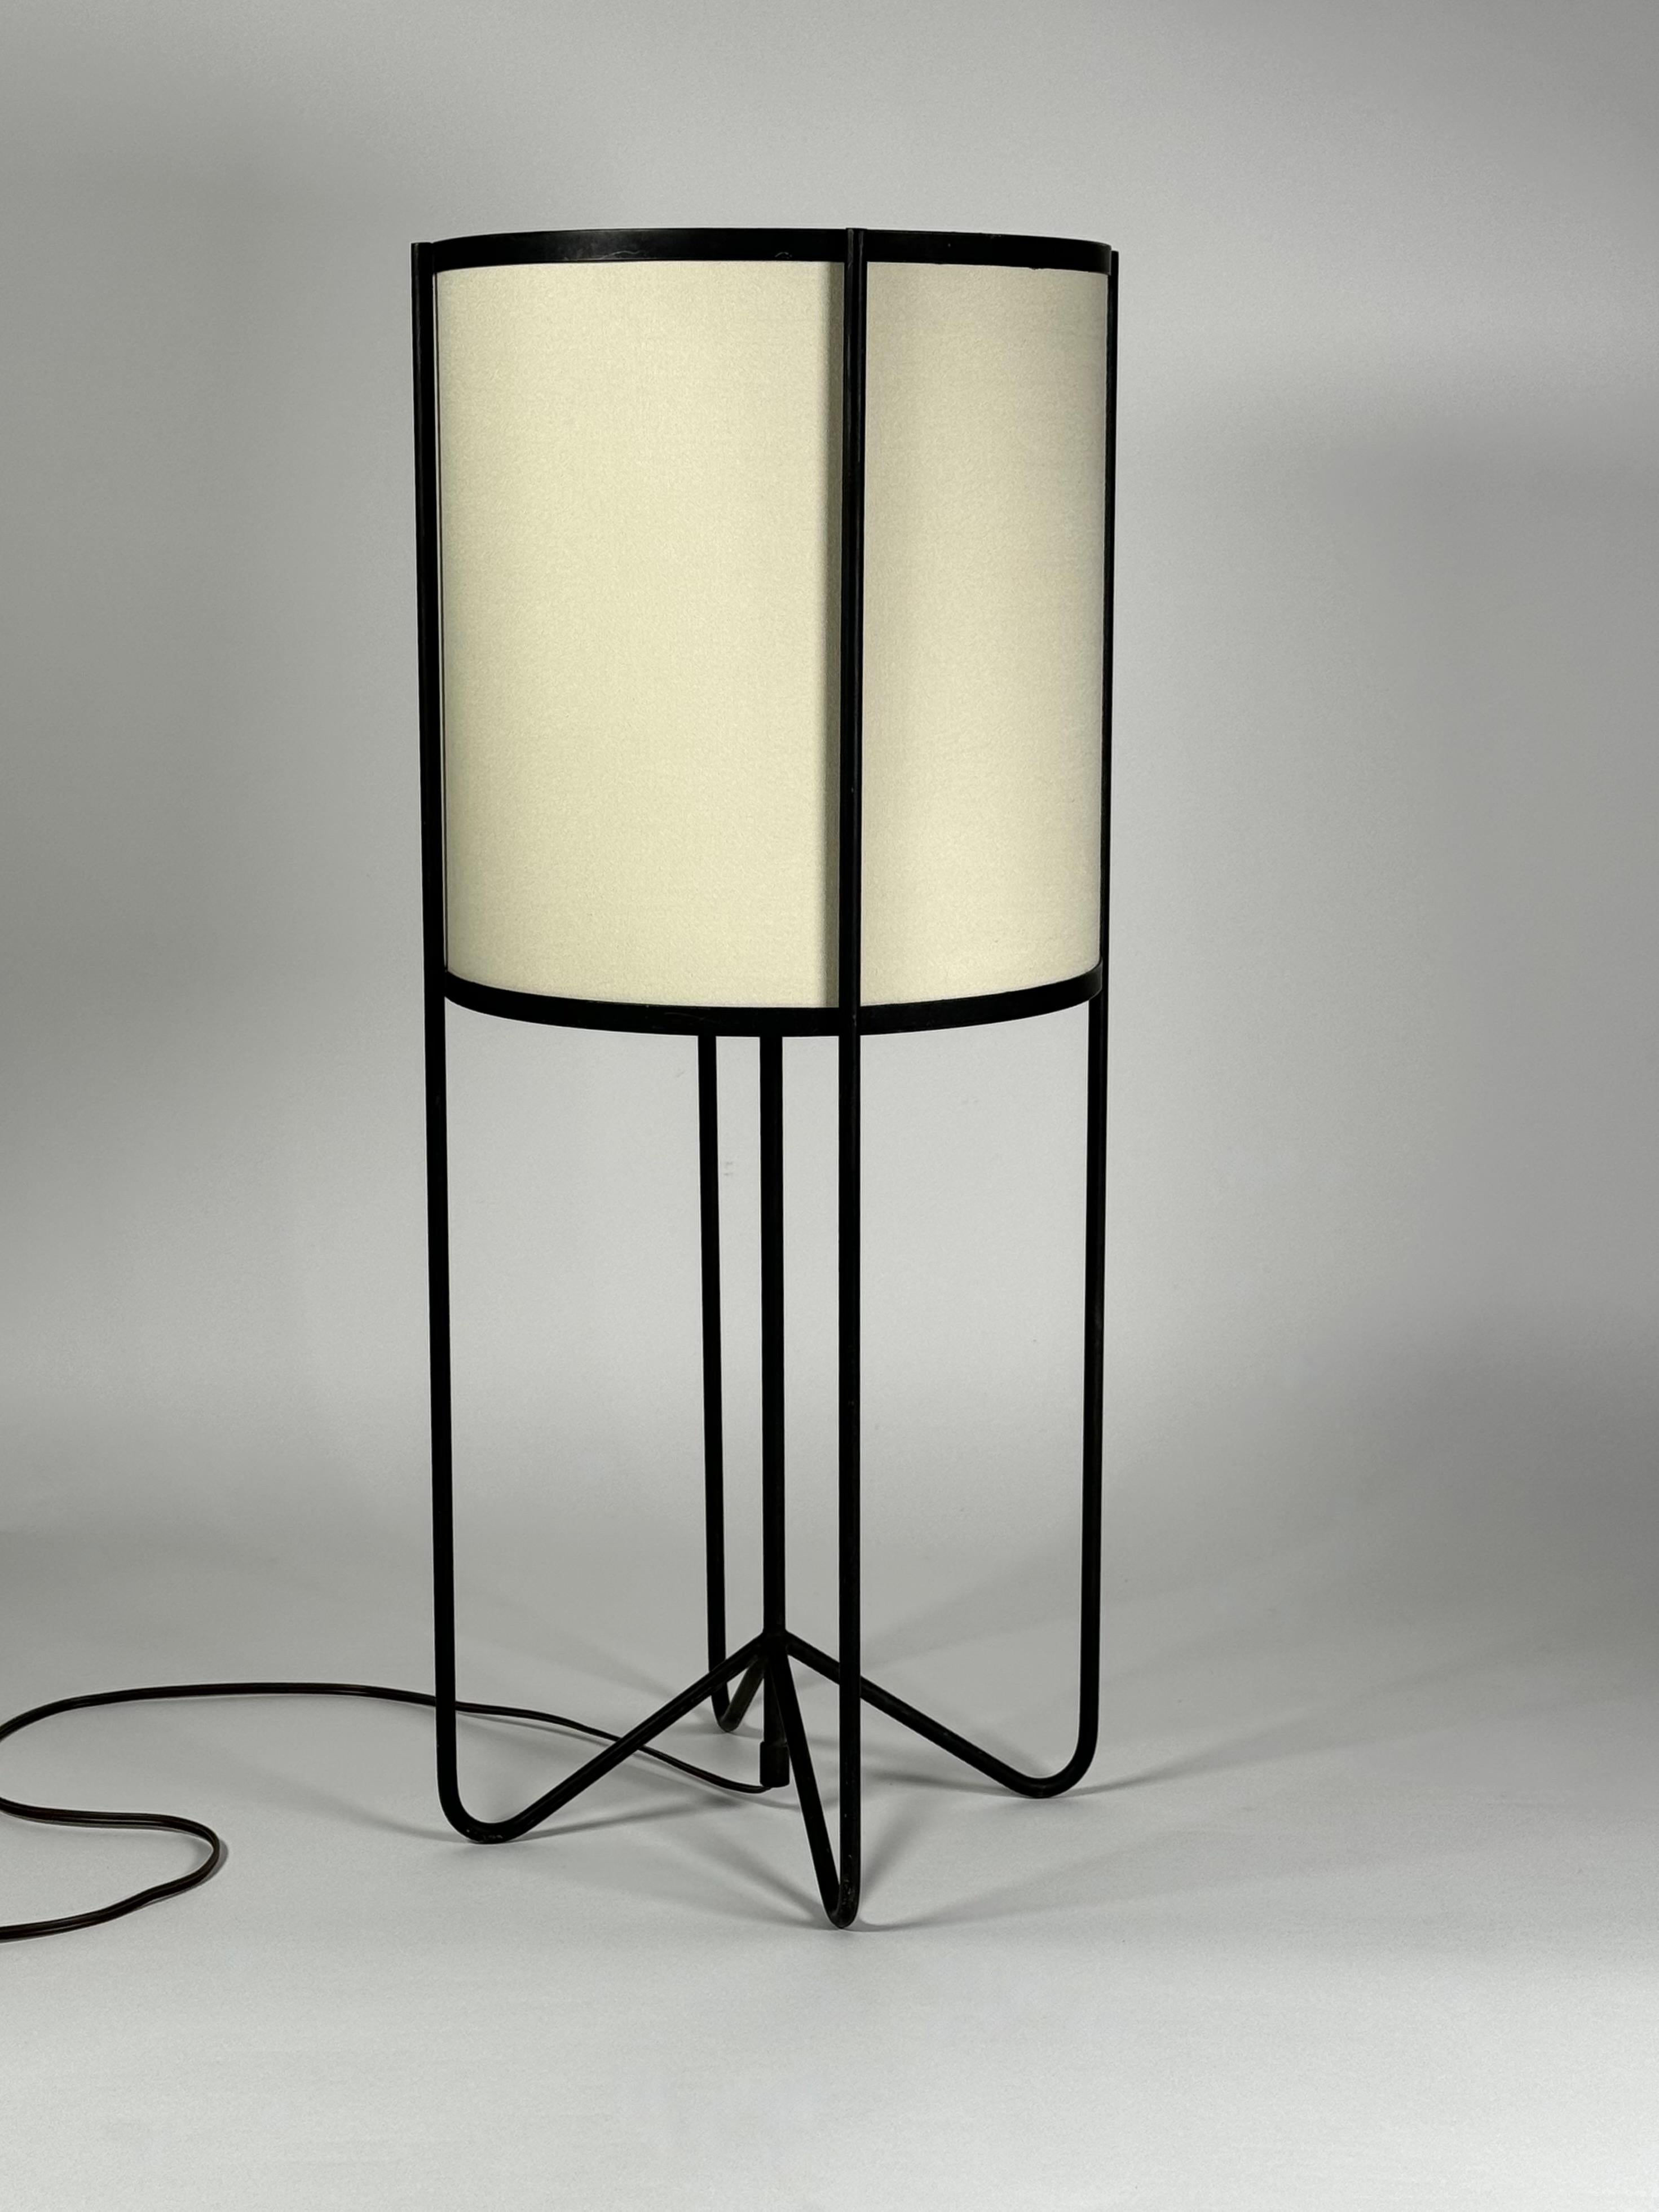 Wrought iron and linen table lamp which embodies the design ethos of the 1950s California Design Lifestyle viewpoint, this design with curved leges and drum shade evokes the connection with the Pacific Rim influence of Japanese culture in Modernist